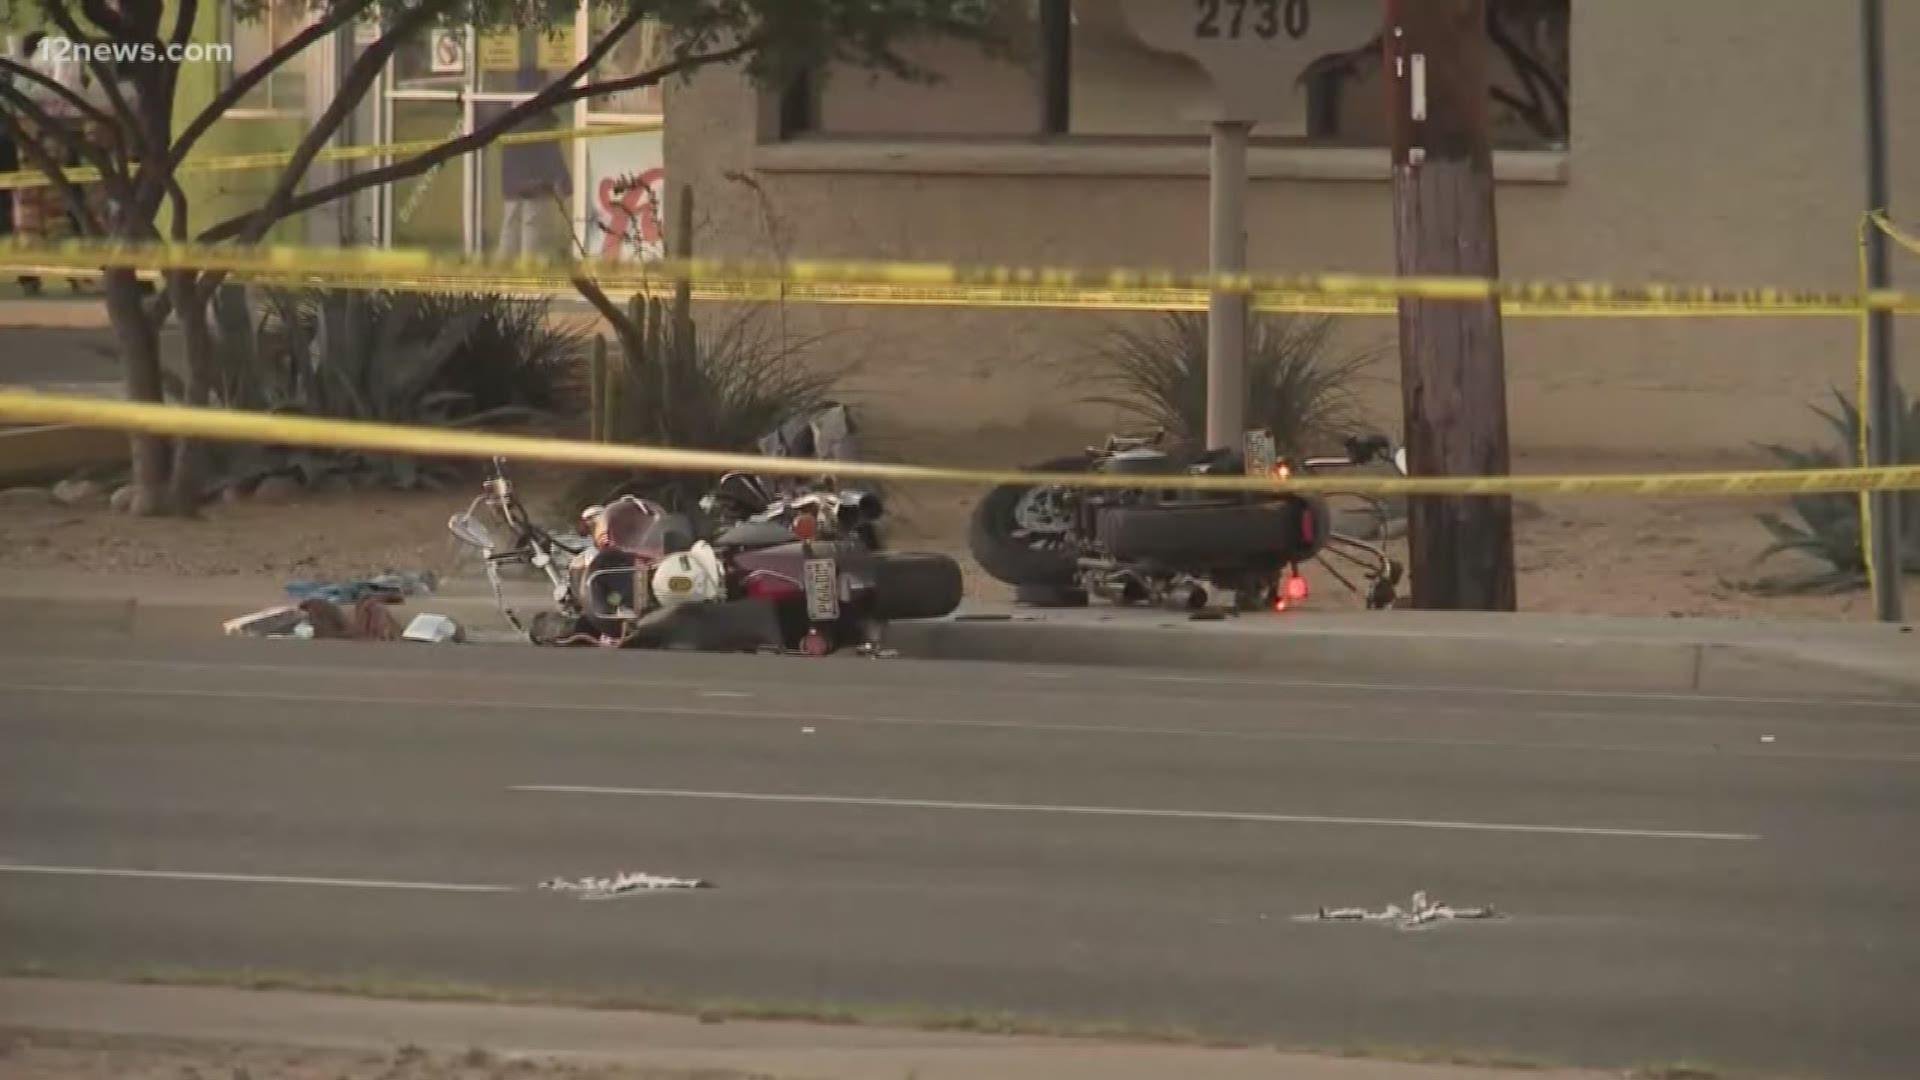 A 61-year-old woman is in 'extremely critical condition' after a motorcycle crash in Phoenix Saturday